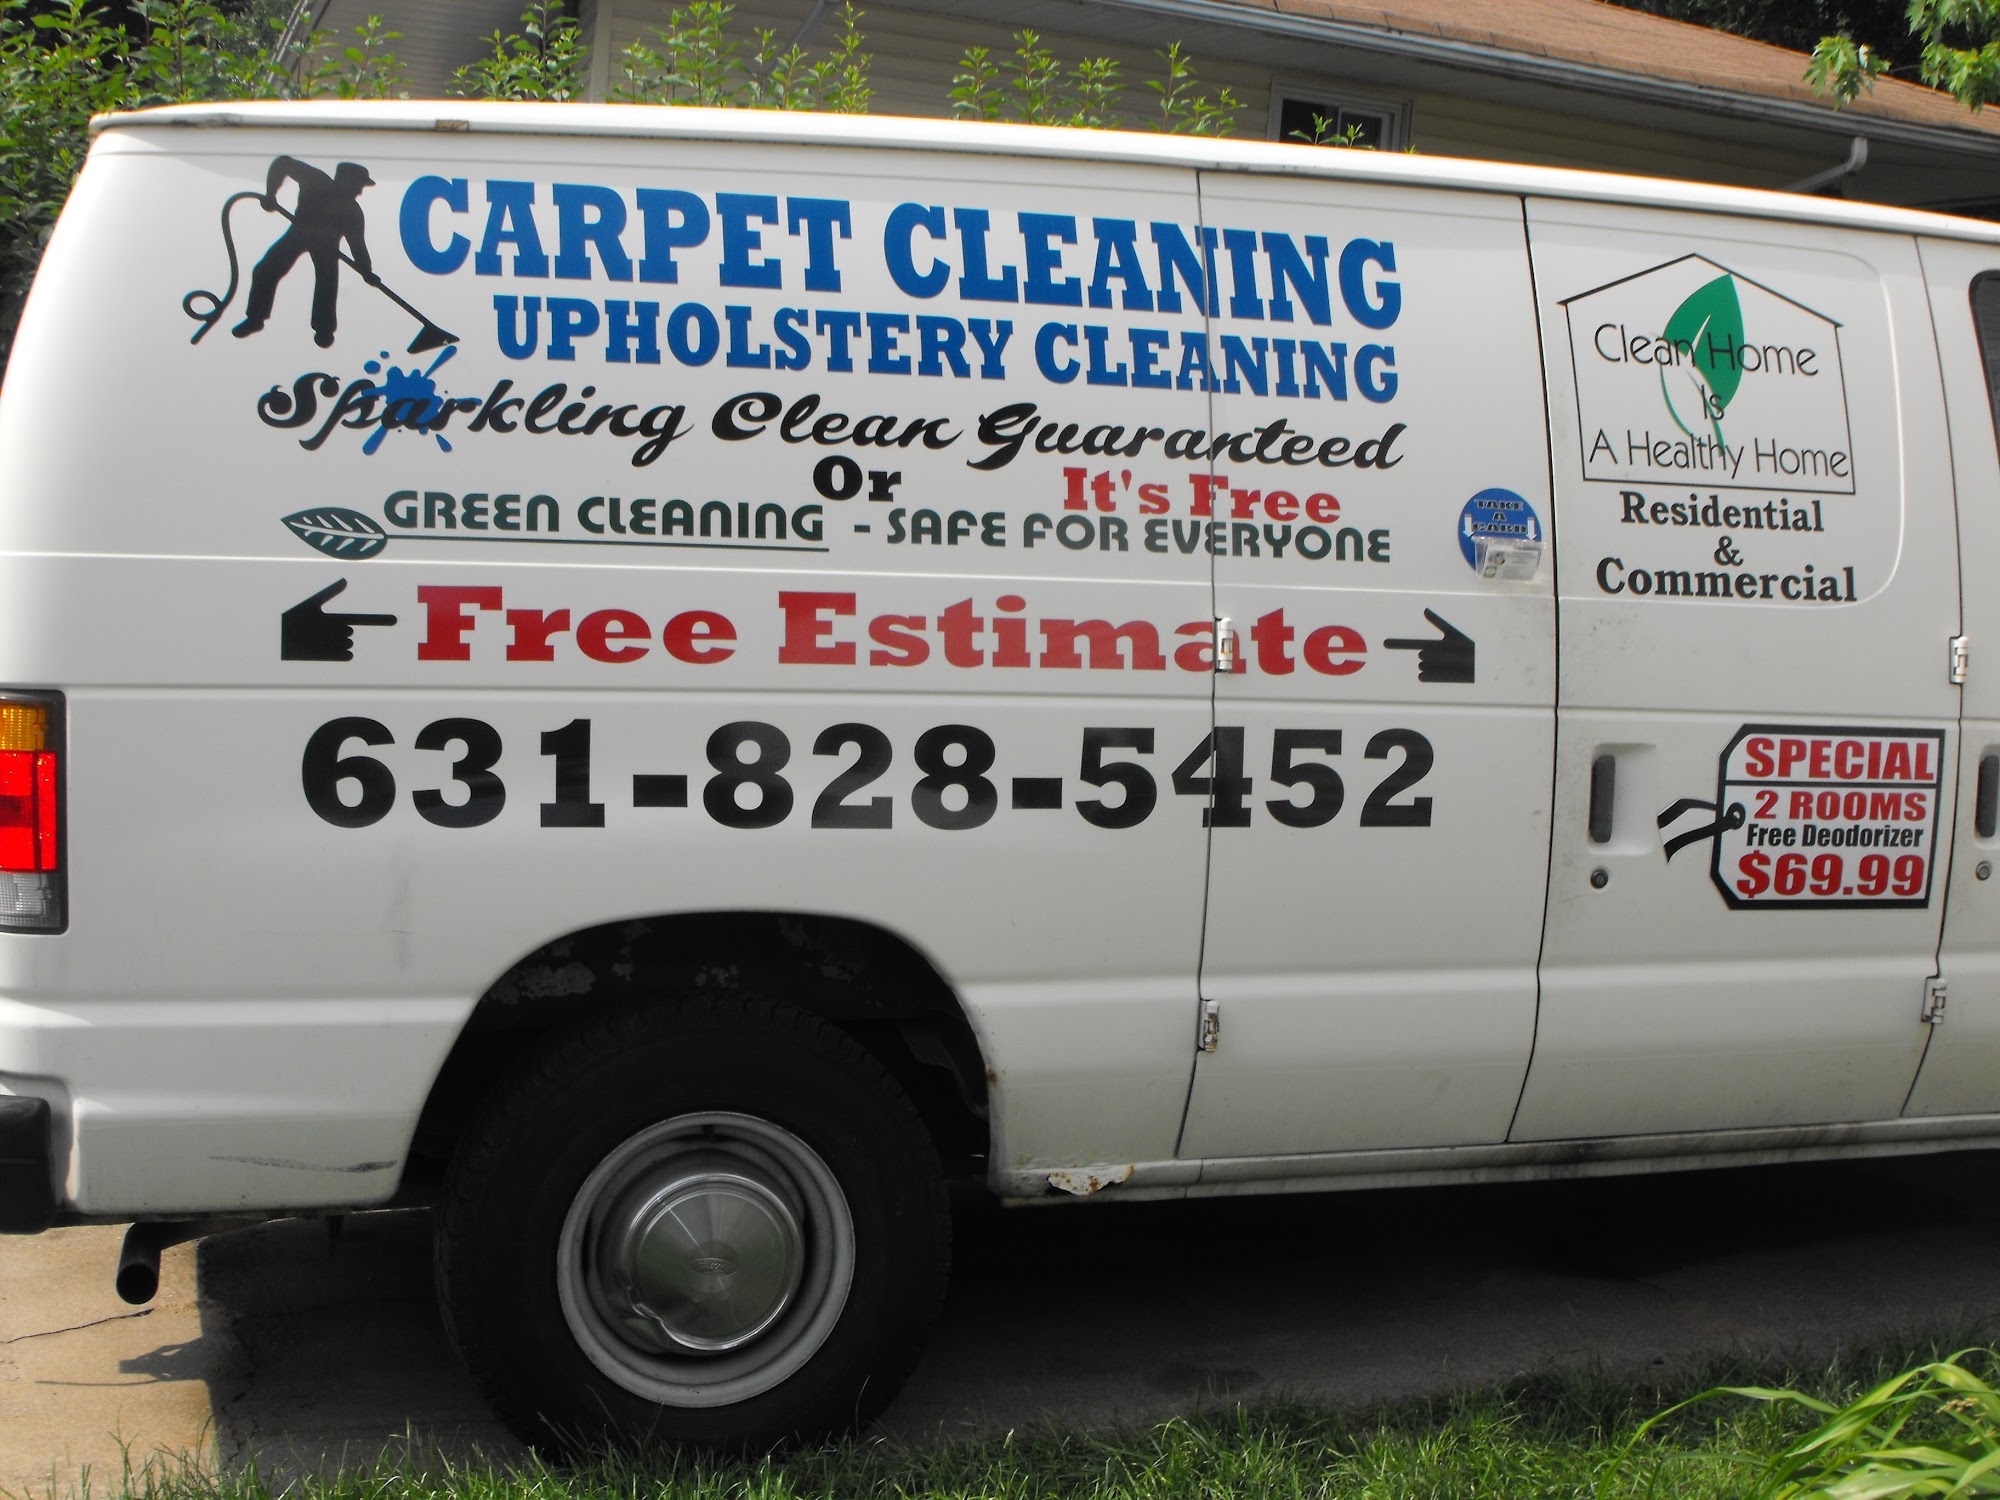 Clean Quest Carpet & Upholstery Cleaning